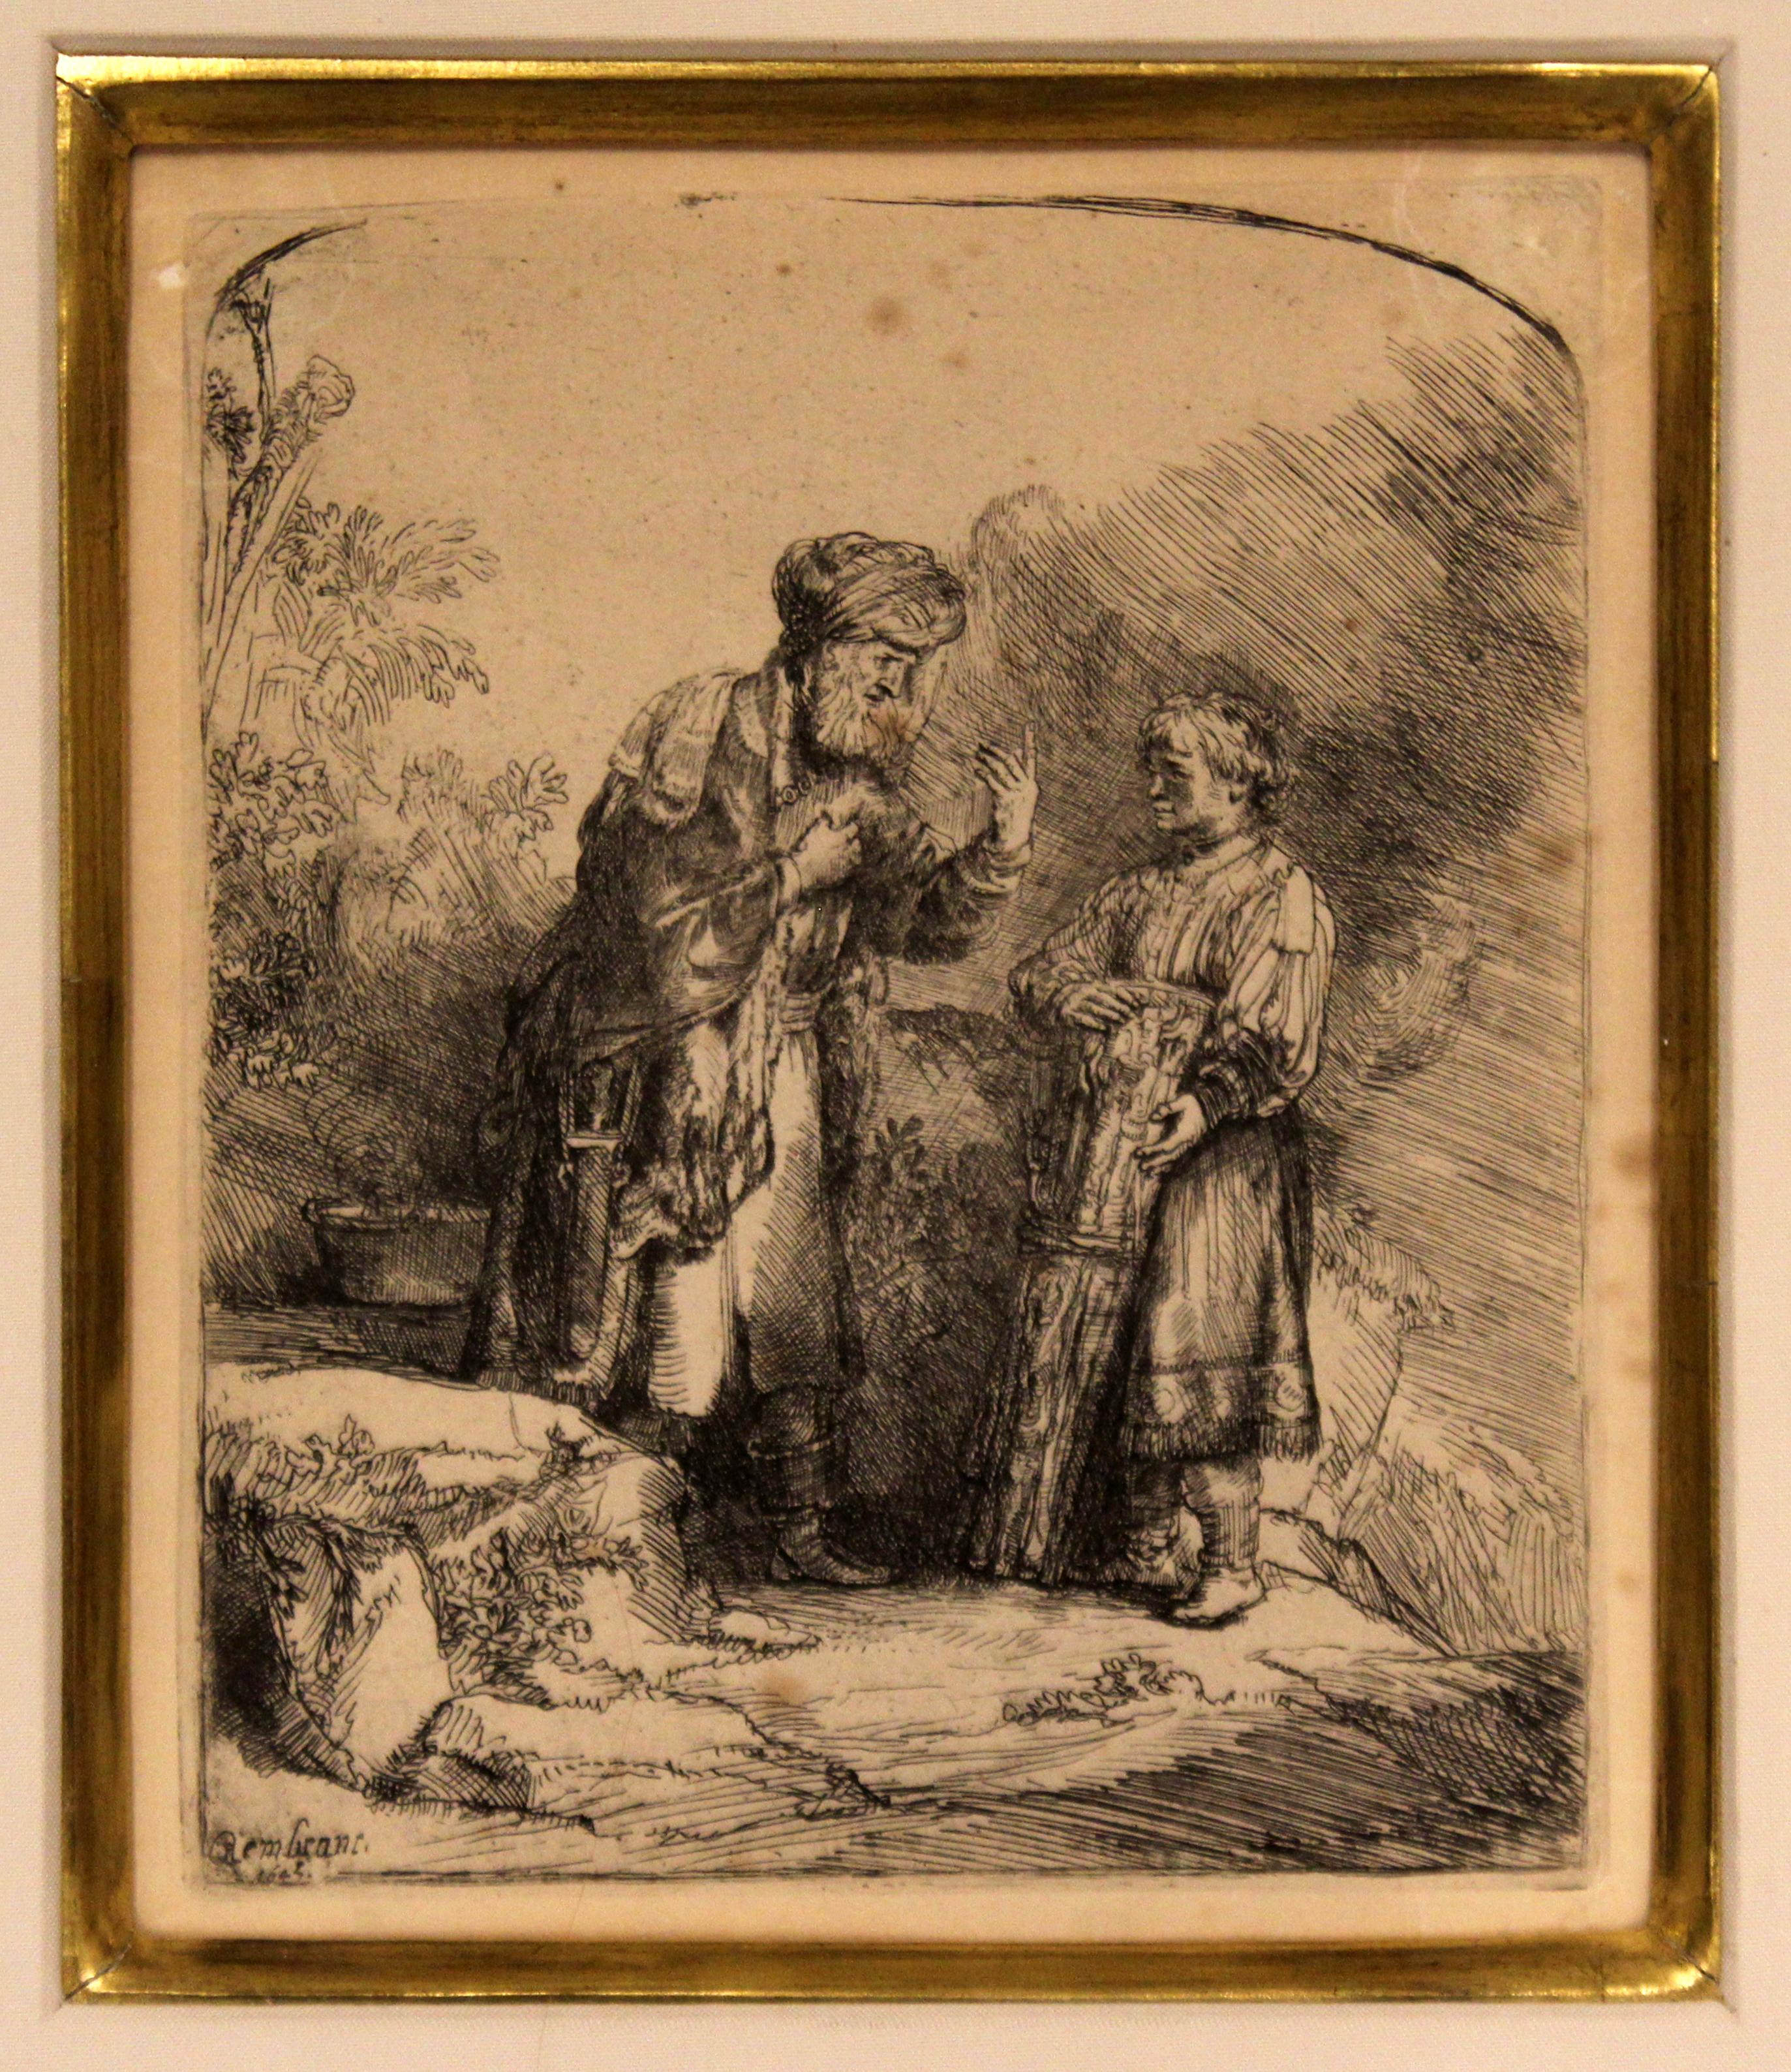 For your consideration is a framed etching of Rembrandt Van Rijn's 